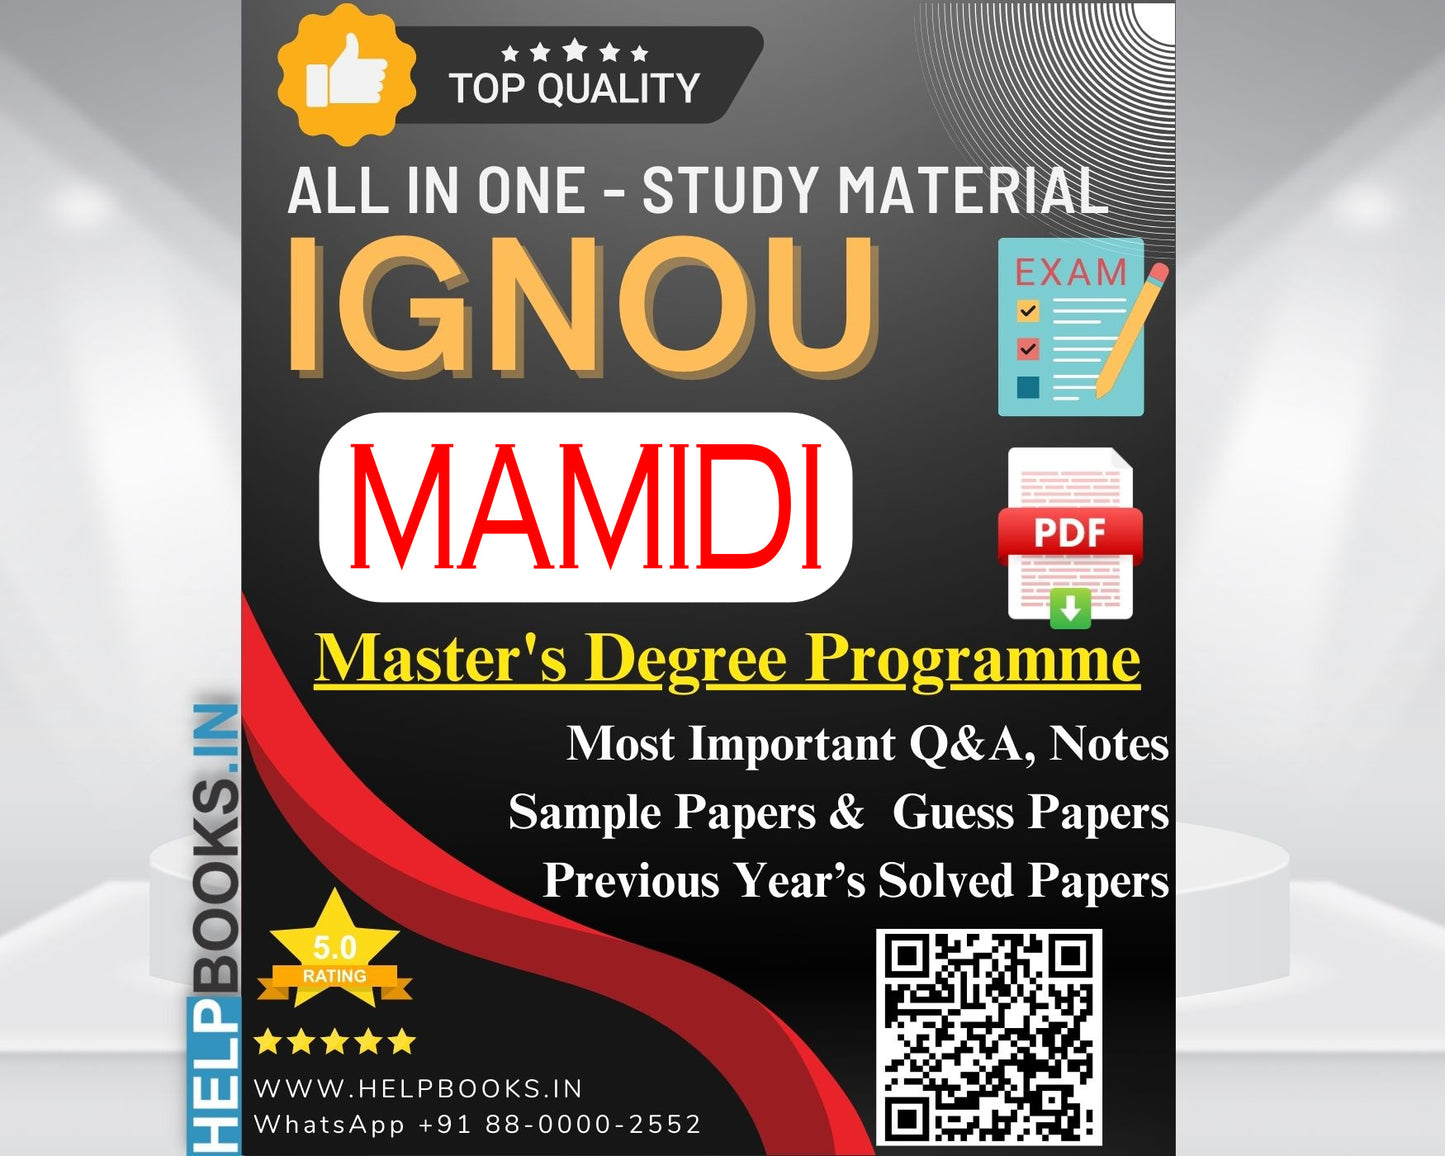 MAMIDI IGNOU Exam Combo of 10 Solved Papers: 5 Previous Years' Solved Papers & 5 Sample Guess Papers for Master of Arts Migration and Diaspora